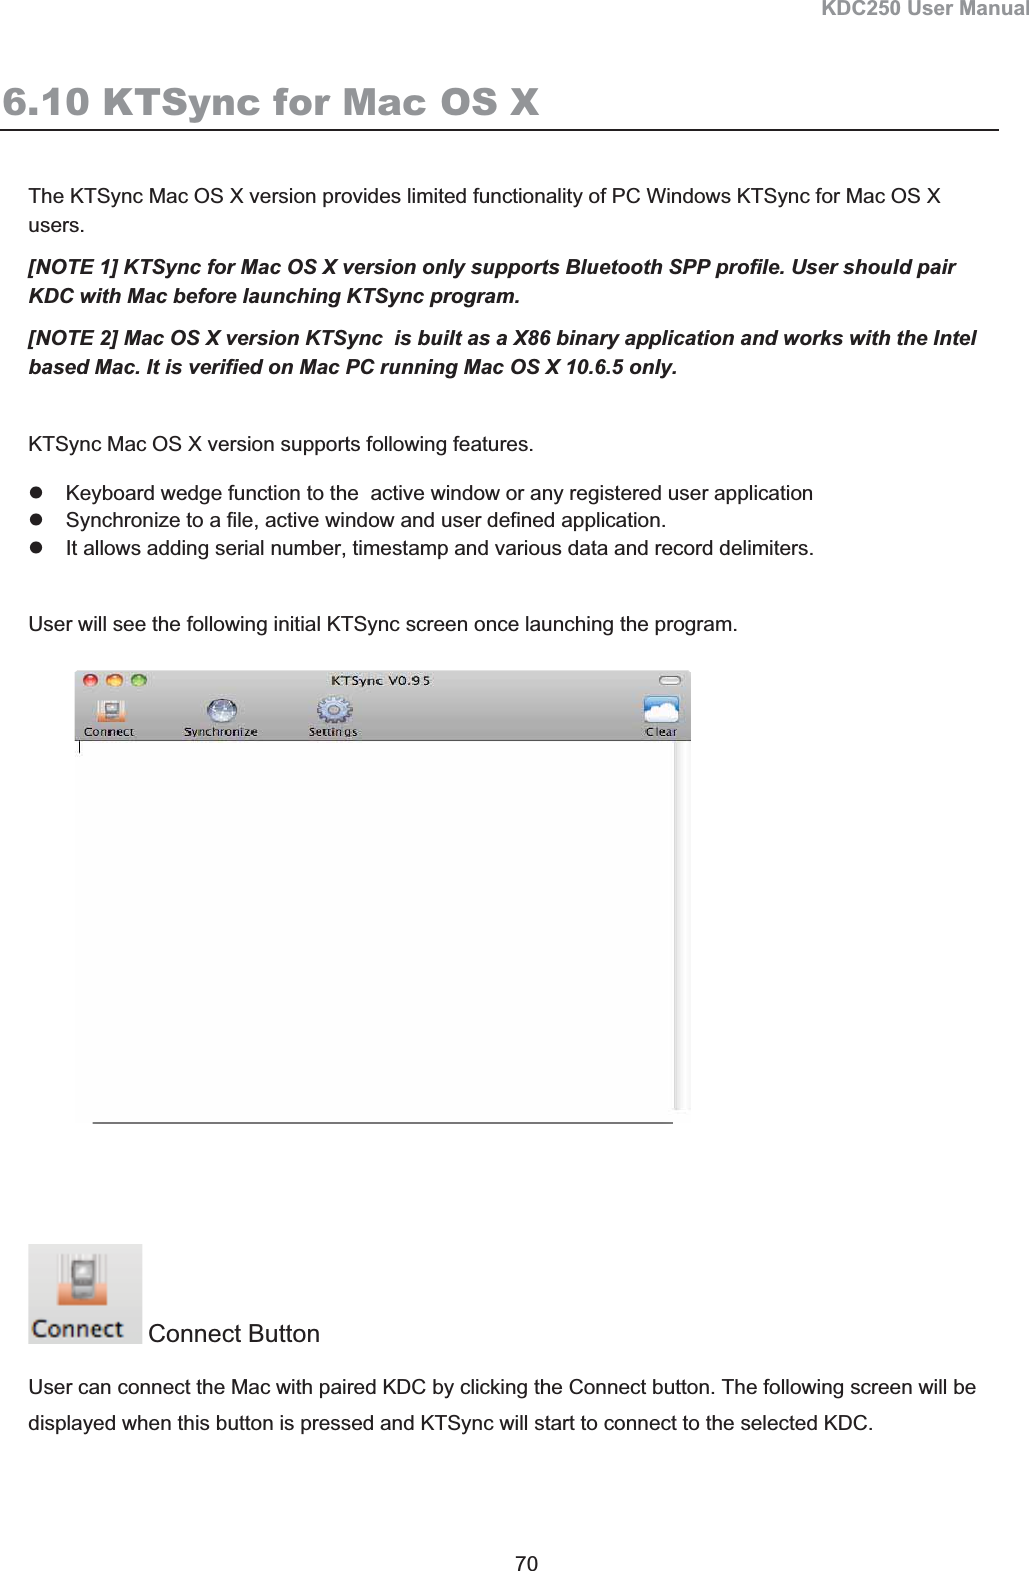 KDC250 User Manual 70 6.10 KTSync for Mac OS X The KTSync Mac OS X version provides limited functionality of PC Windows KTSync for Mac OS X users.  [NOTE 1] KTSync for Mac OS X version only supports Bluetooth SPP profile. User should pair KDC with Mac before launching KTSync program. [NOTE 2] Mac OS X version KTSync  is built as a X86 binary application and works with the Intel based Mac. It is verified on Mac PC running Mac OS X 10.6.5 only. KTSync Mac OS X version supports following features. z  Keyboard wedge function to the  active window or any registered user application z  Synchronize to a file, active window and user defined application. z  It allows adding serial number, timestamp and various data and record delimiters. User will see the following initial KTSync screen once launching the program. Connect Button User can connect the Mac with paired KDC by clicking the Connect button. The following screen will be displayed when this button is pressed and KTSync will start to connect to the selected KDC. 